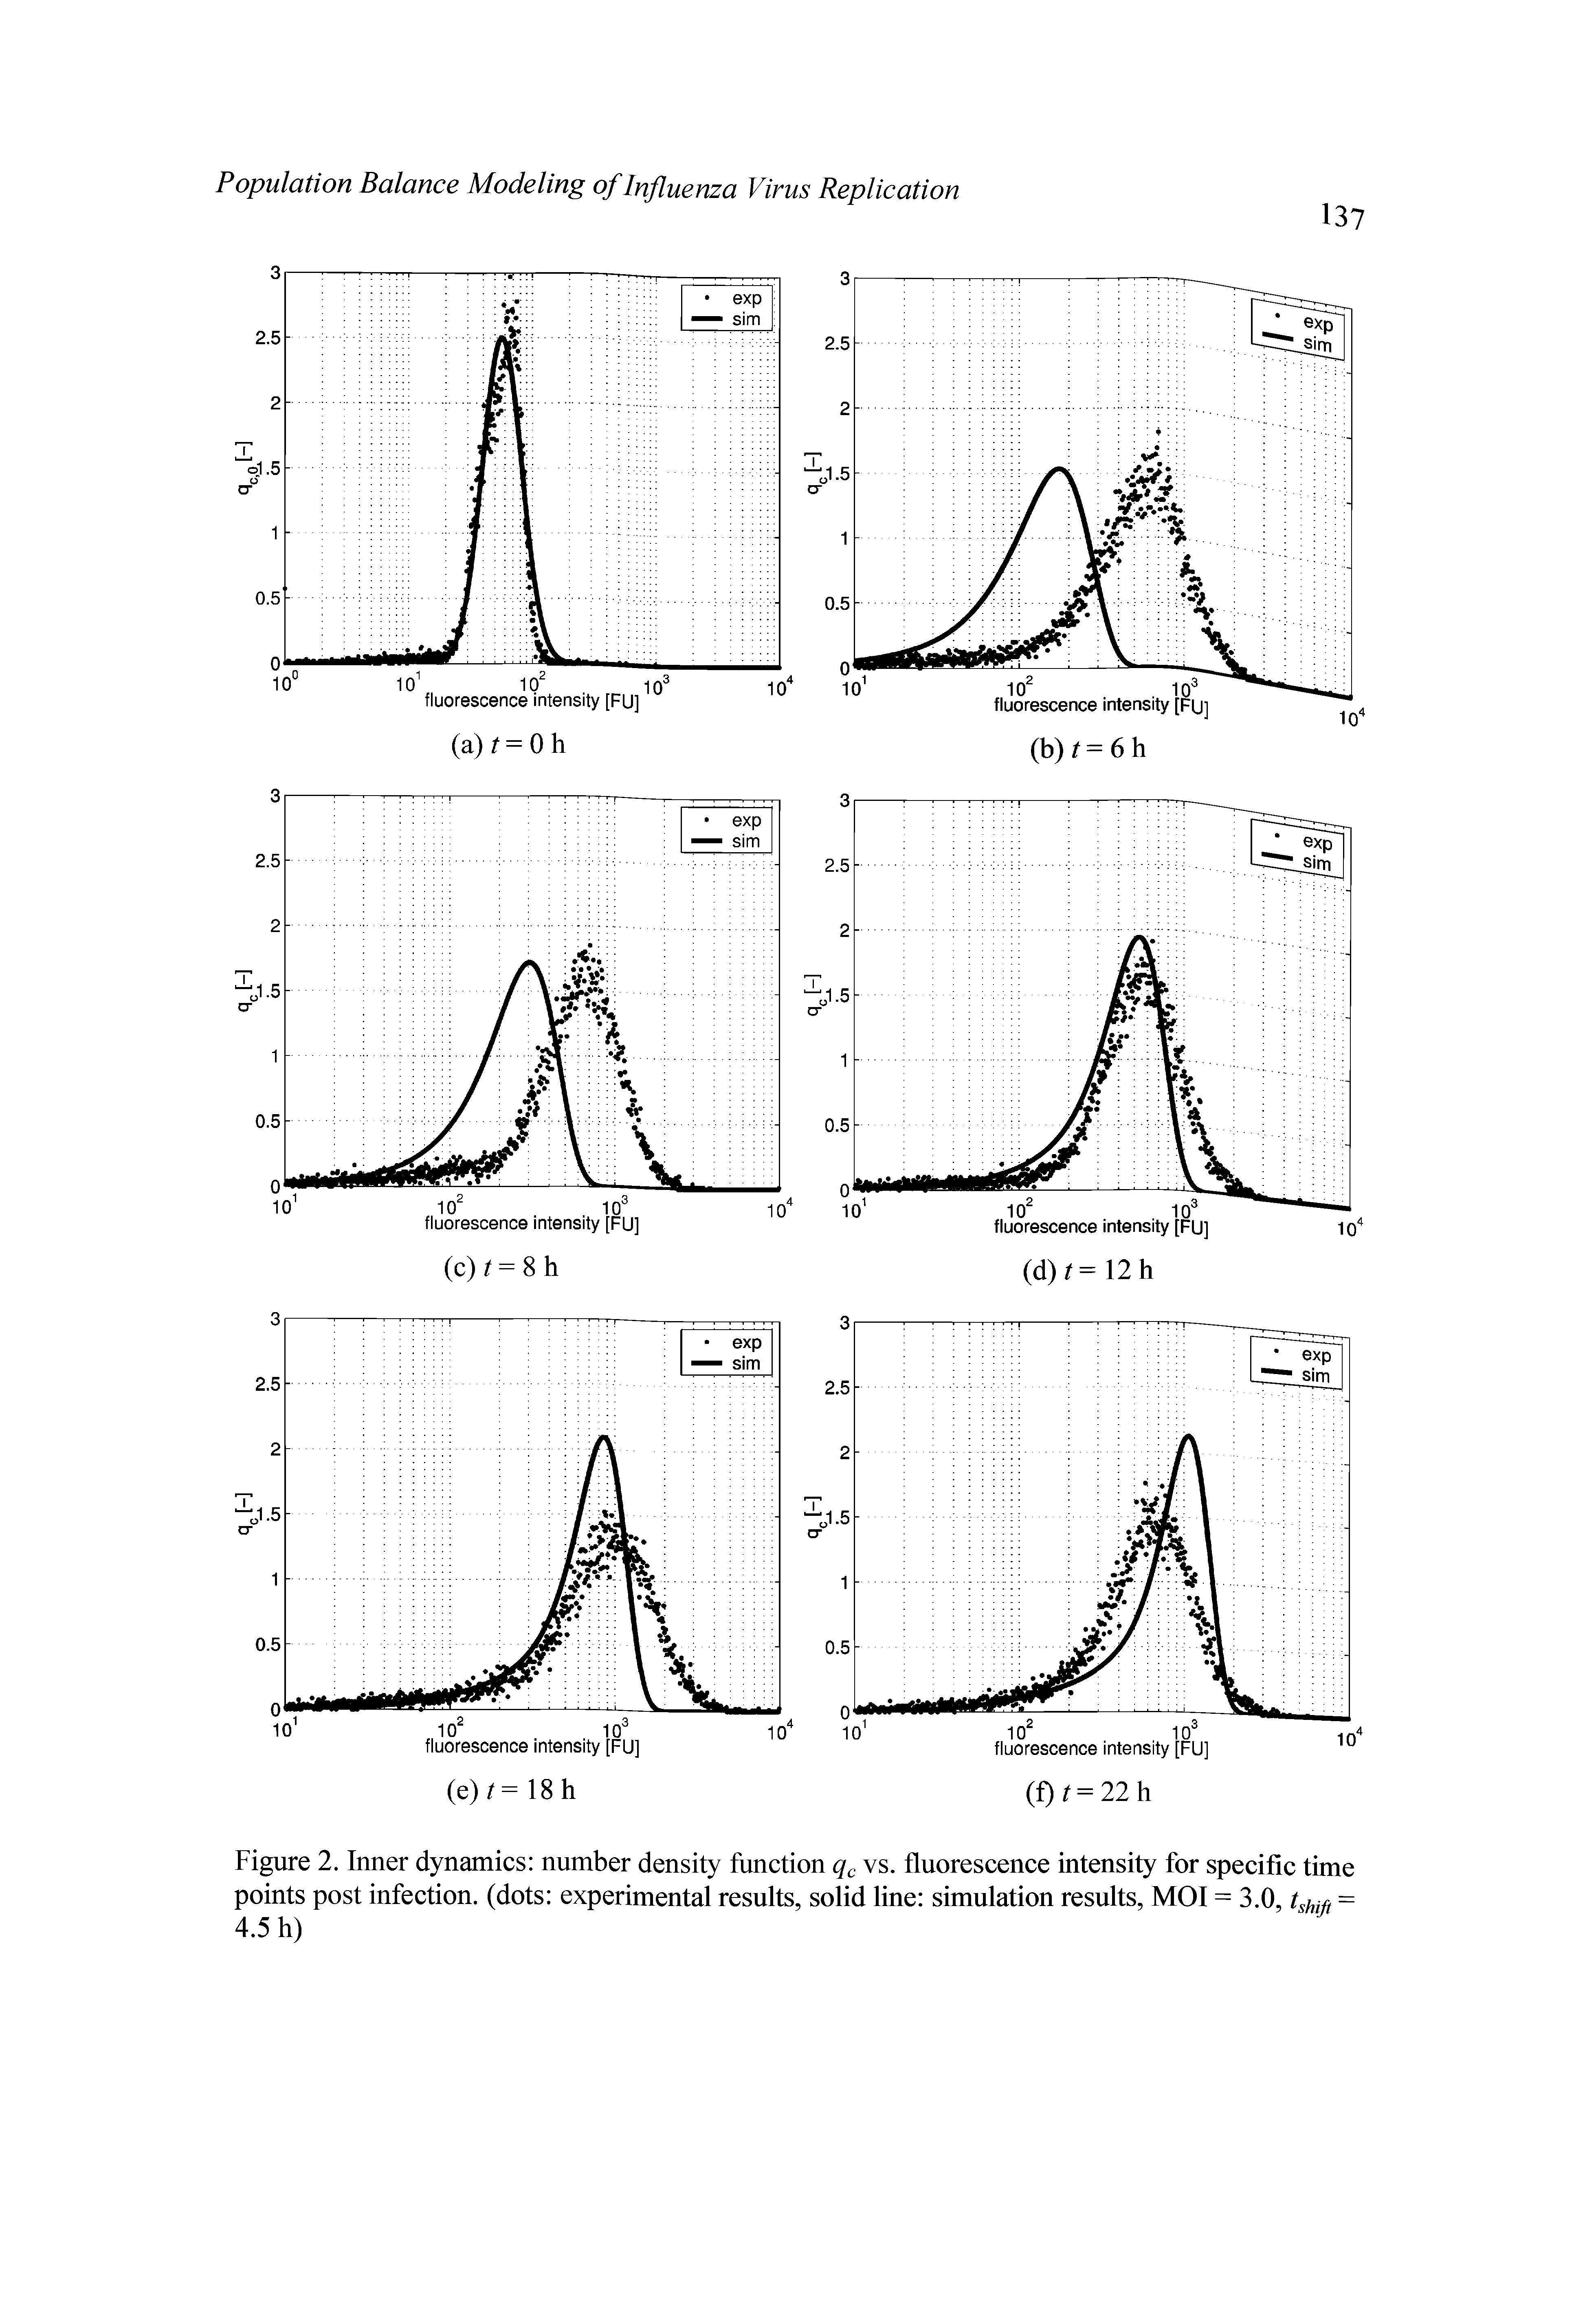 Figure 2. Inner dynamics number density function qc vs. fluorescence intensity for specific time points post infection, (dots experimental results, solid line simulation results, MOI = 3.0, tg t = 4.5 h)...